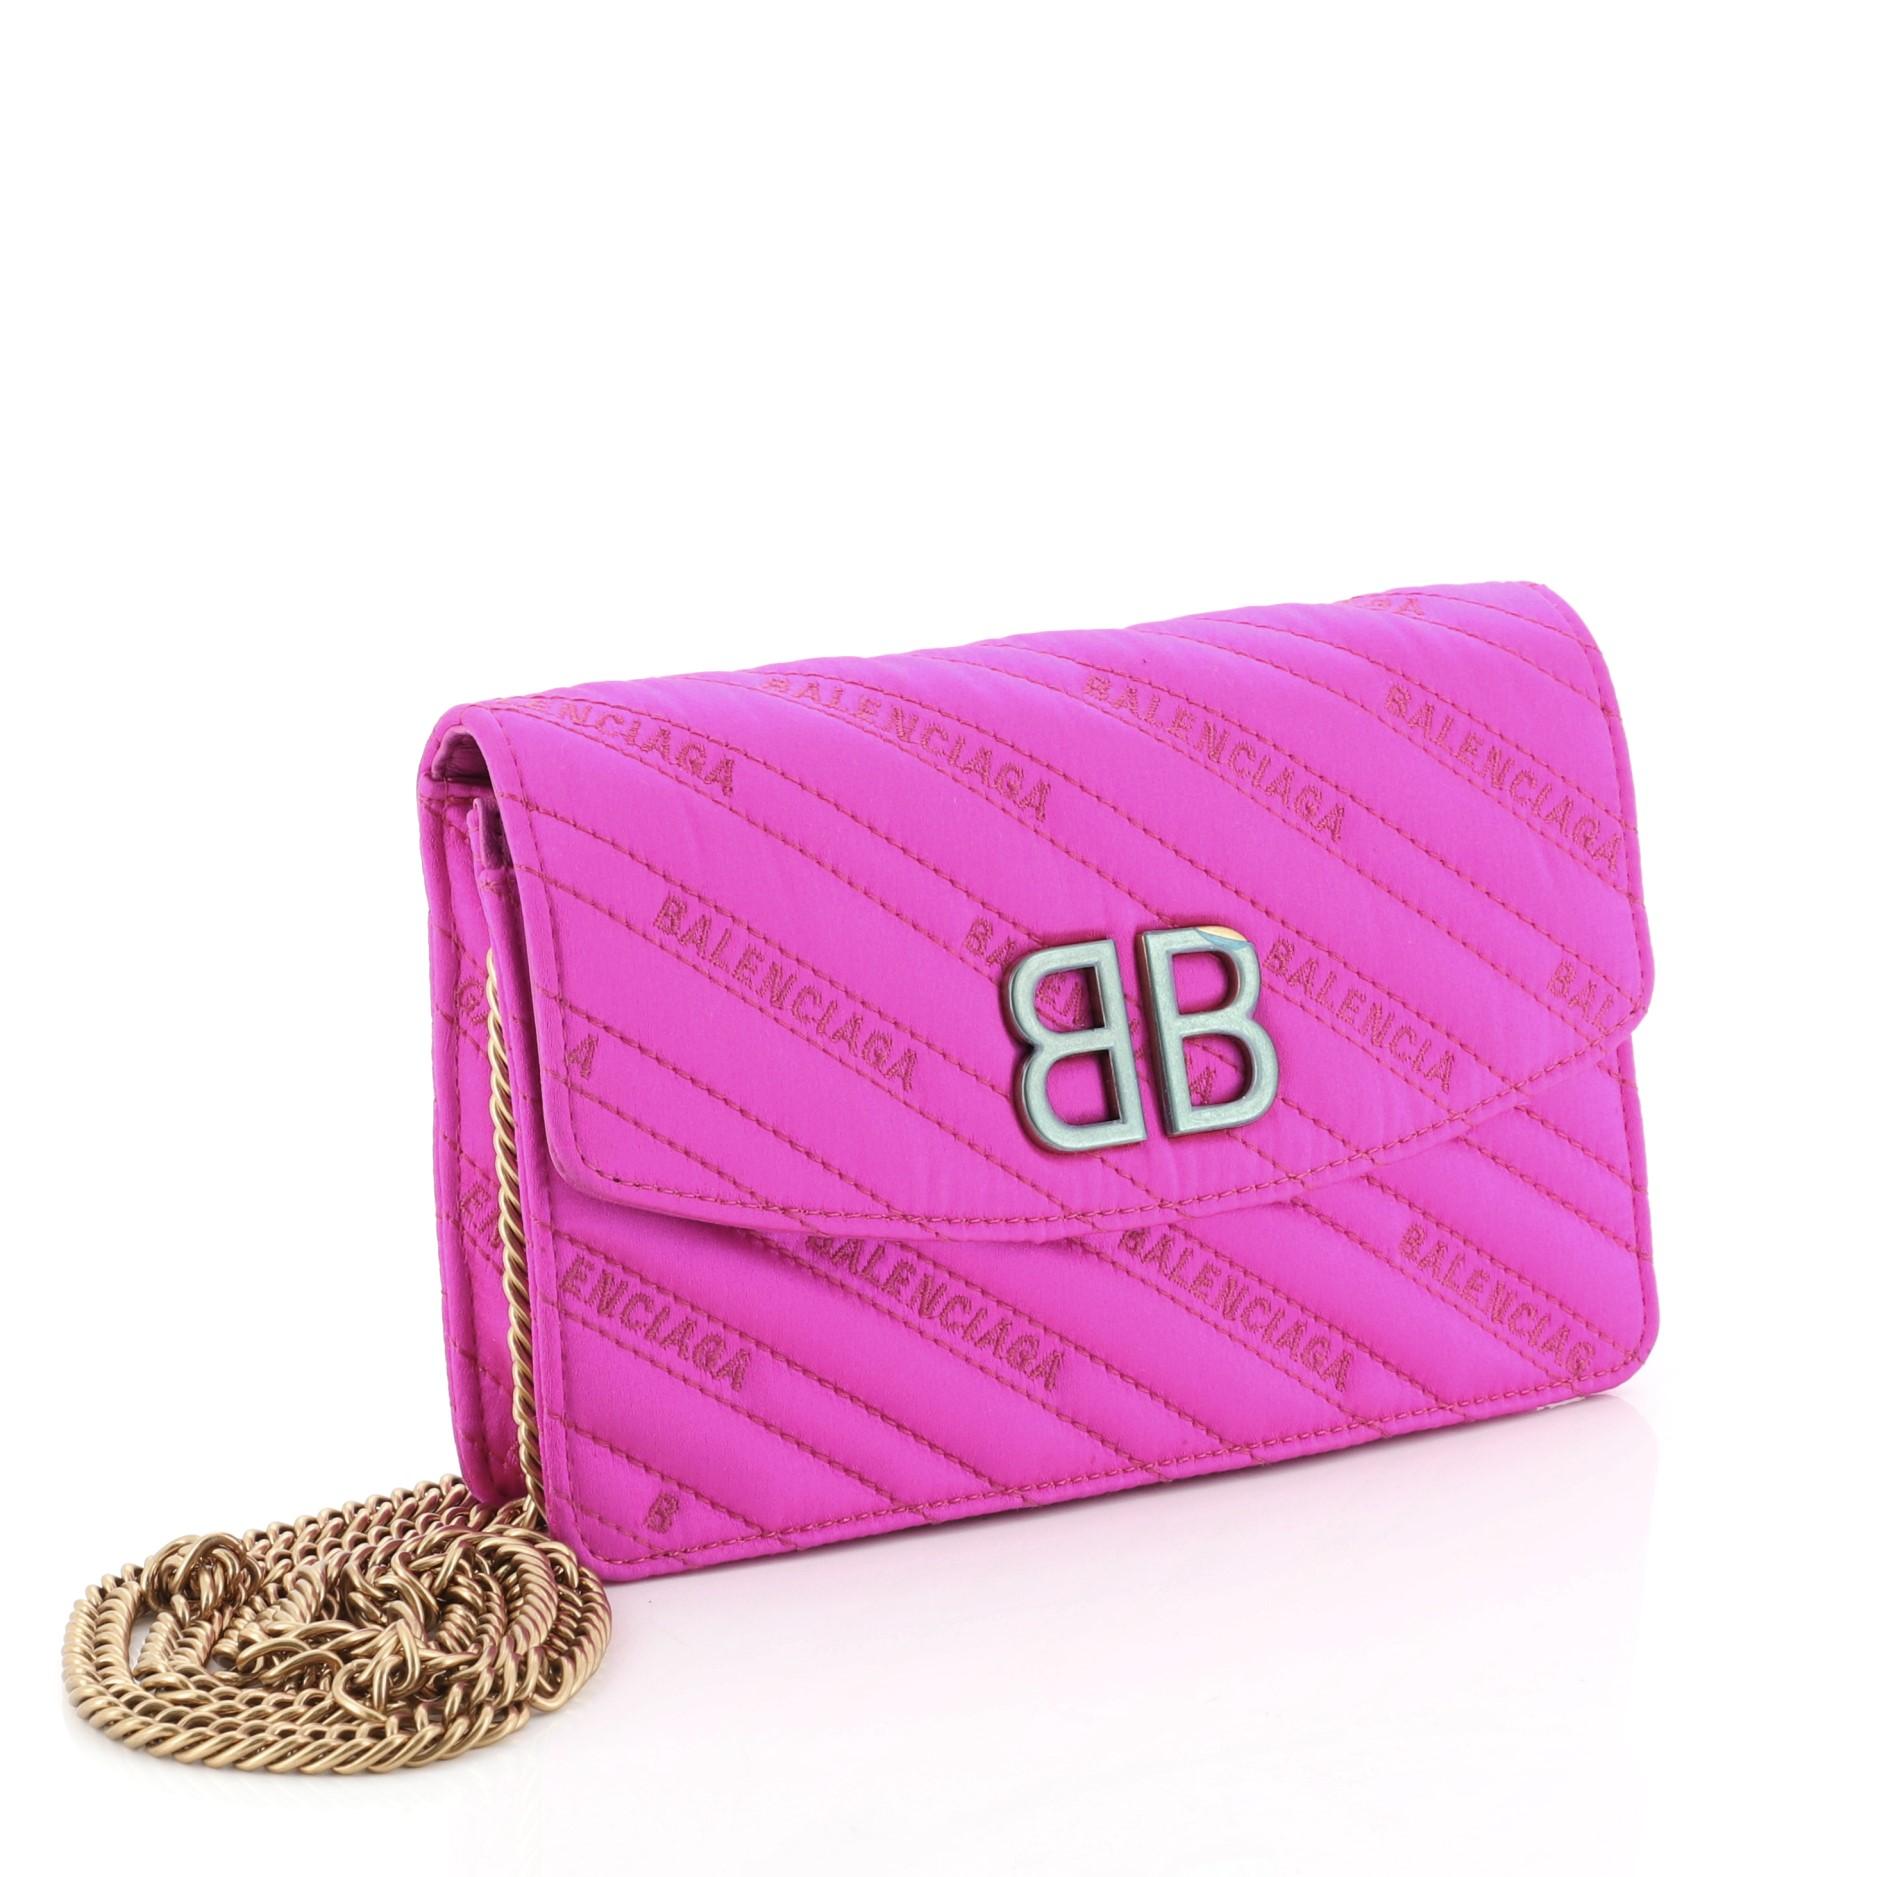 This Balenciaga BB Chain Wallet Quilted Satin, crafted from pink quilted satin, features chain link strap, BB logo on the flap and gold-tone hardware. Its flap opens to a pink leather interior with multiple card slots and zip pocket. 

Estimated